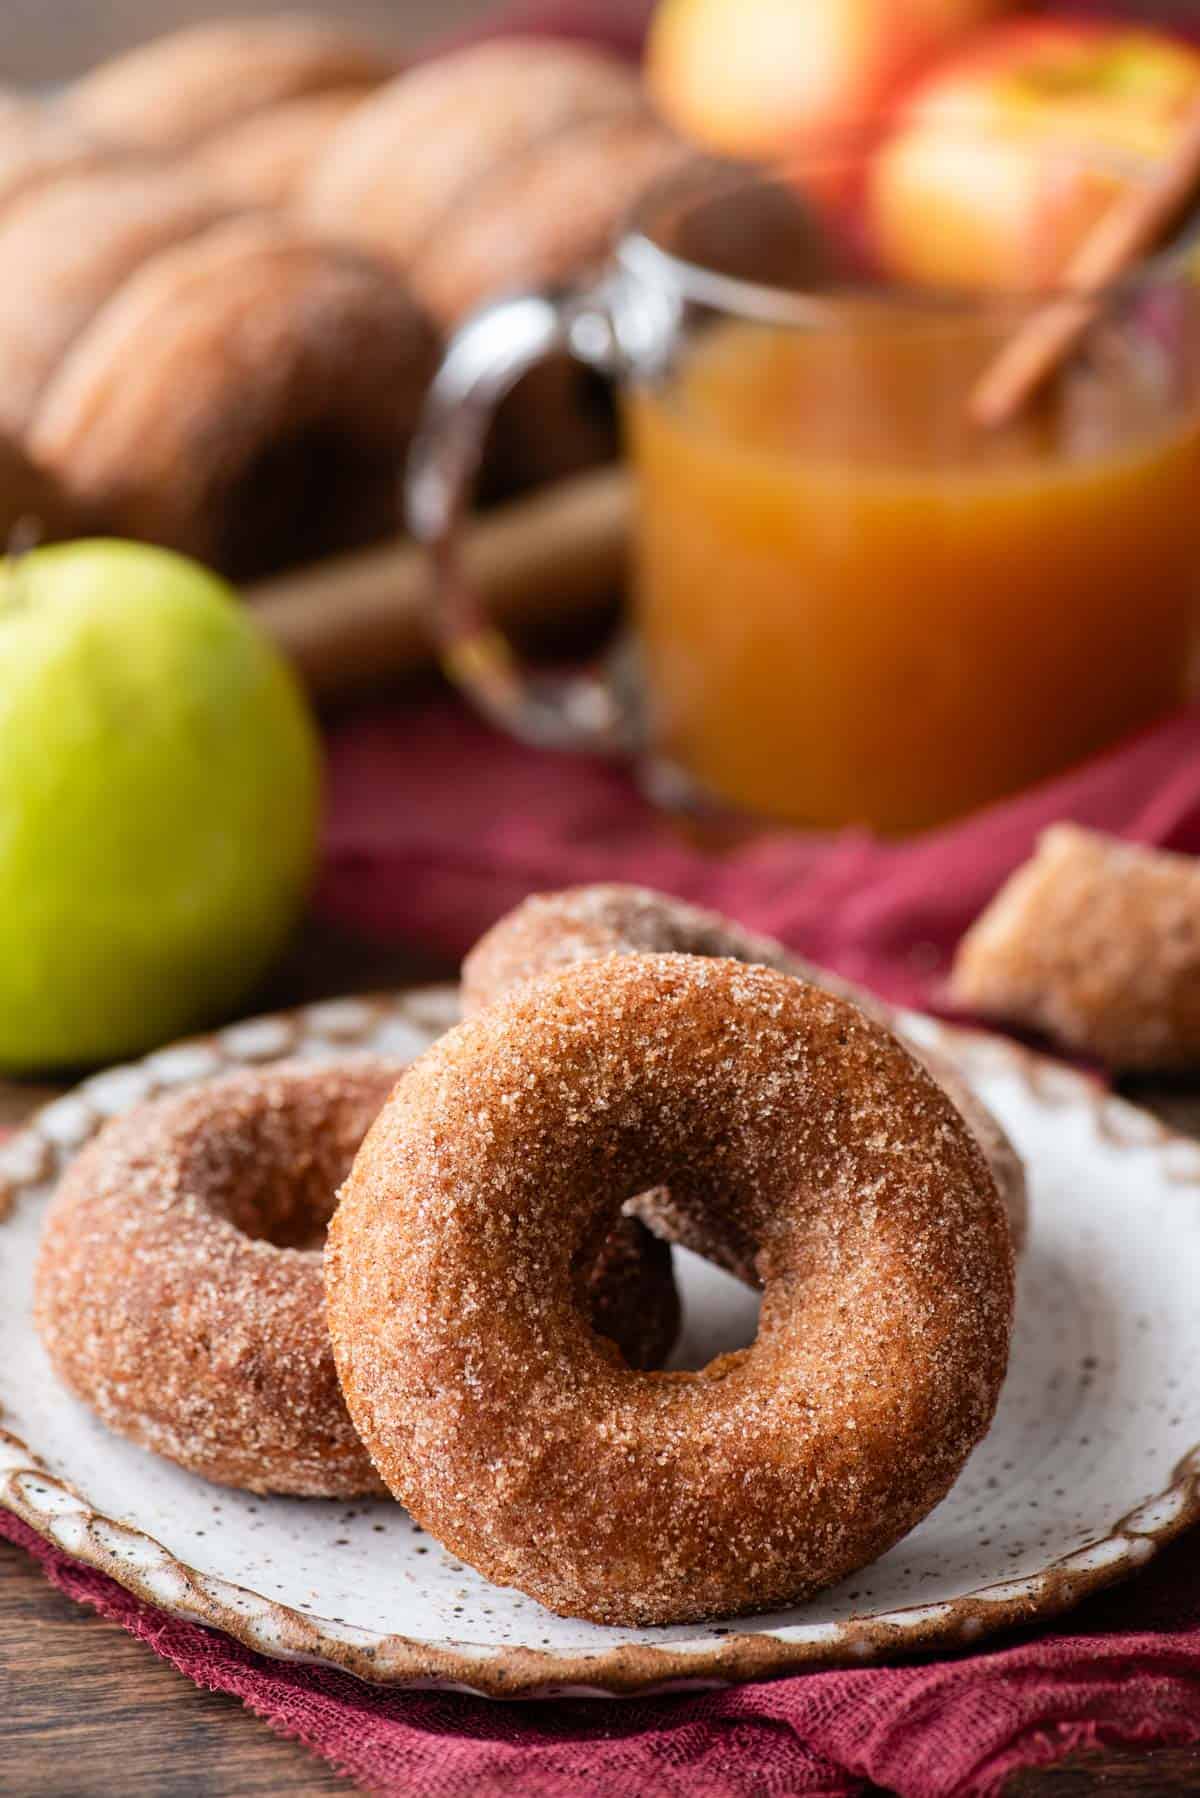 three apple cider donuts on a plate that is sitting on top of a maroon kitchen towel, surrounded by a whole green apple, a cup of apple cider, and more donuts